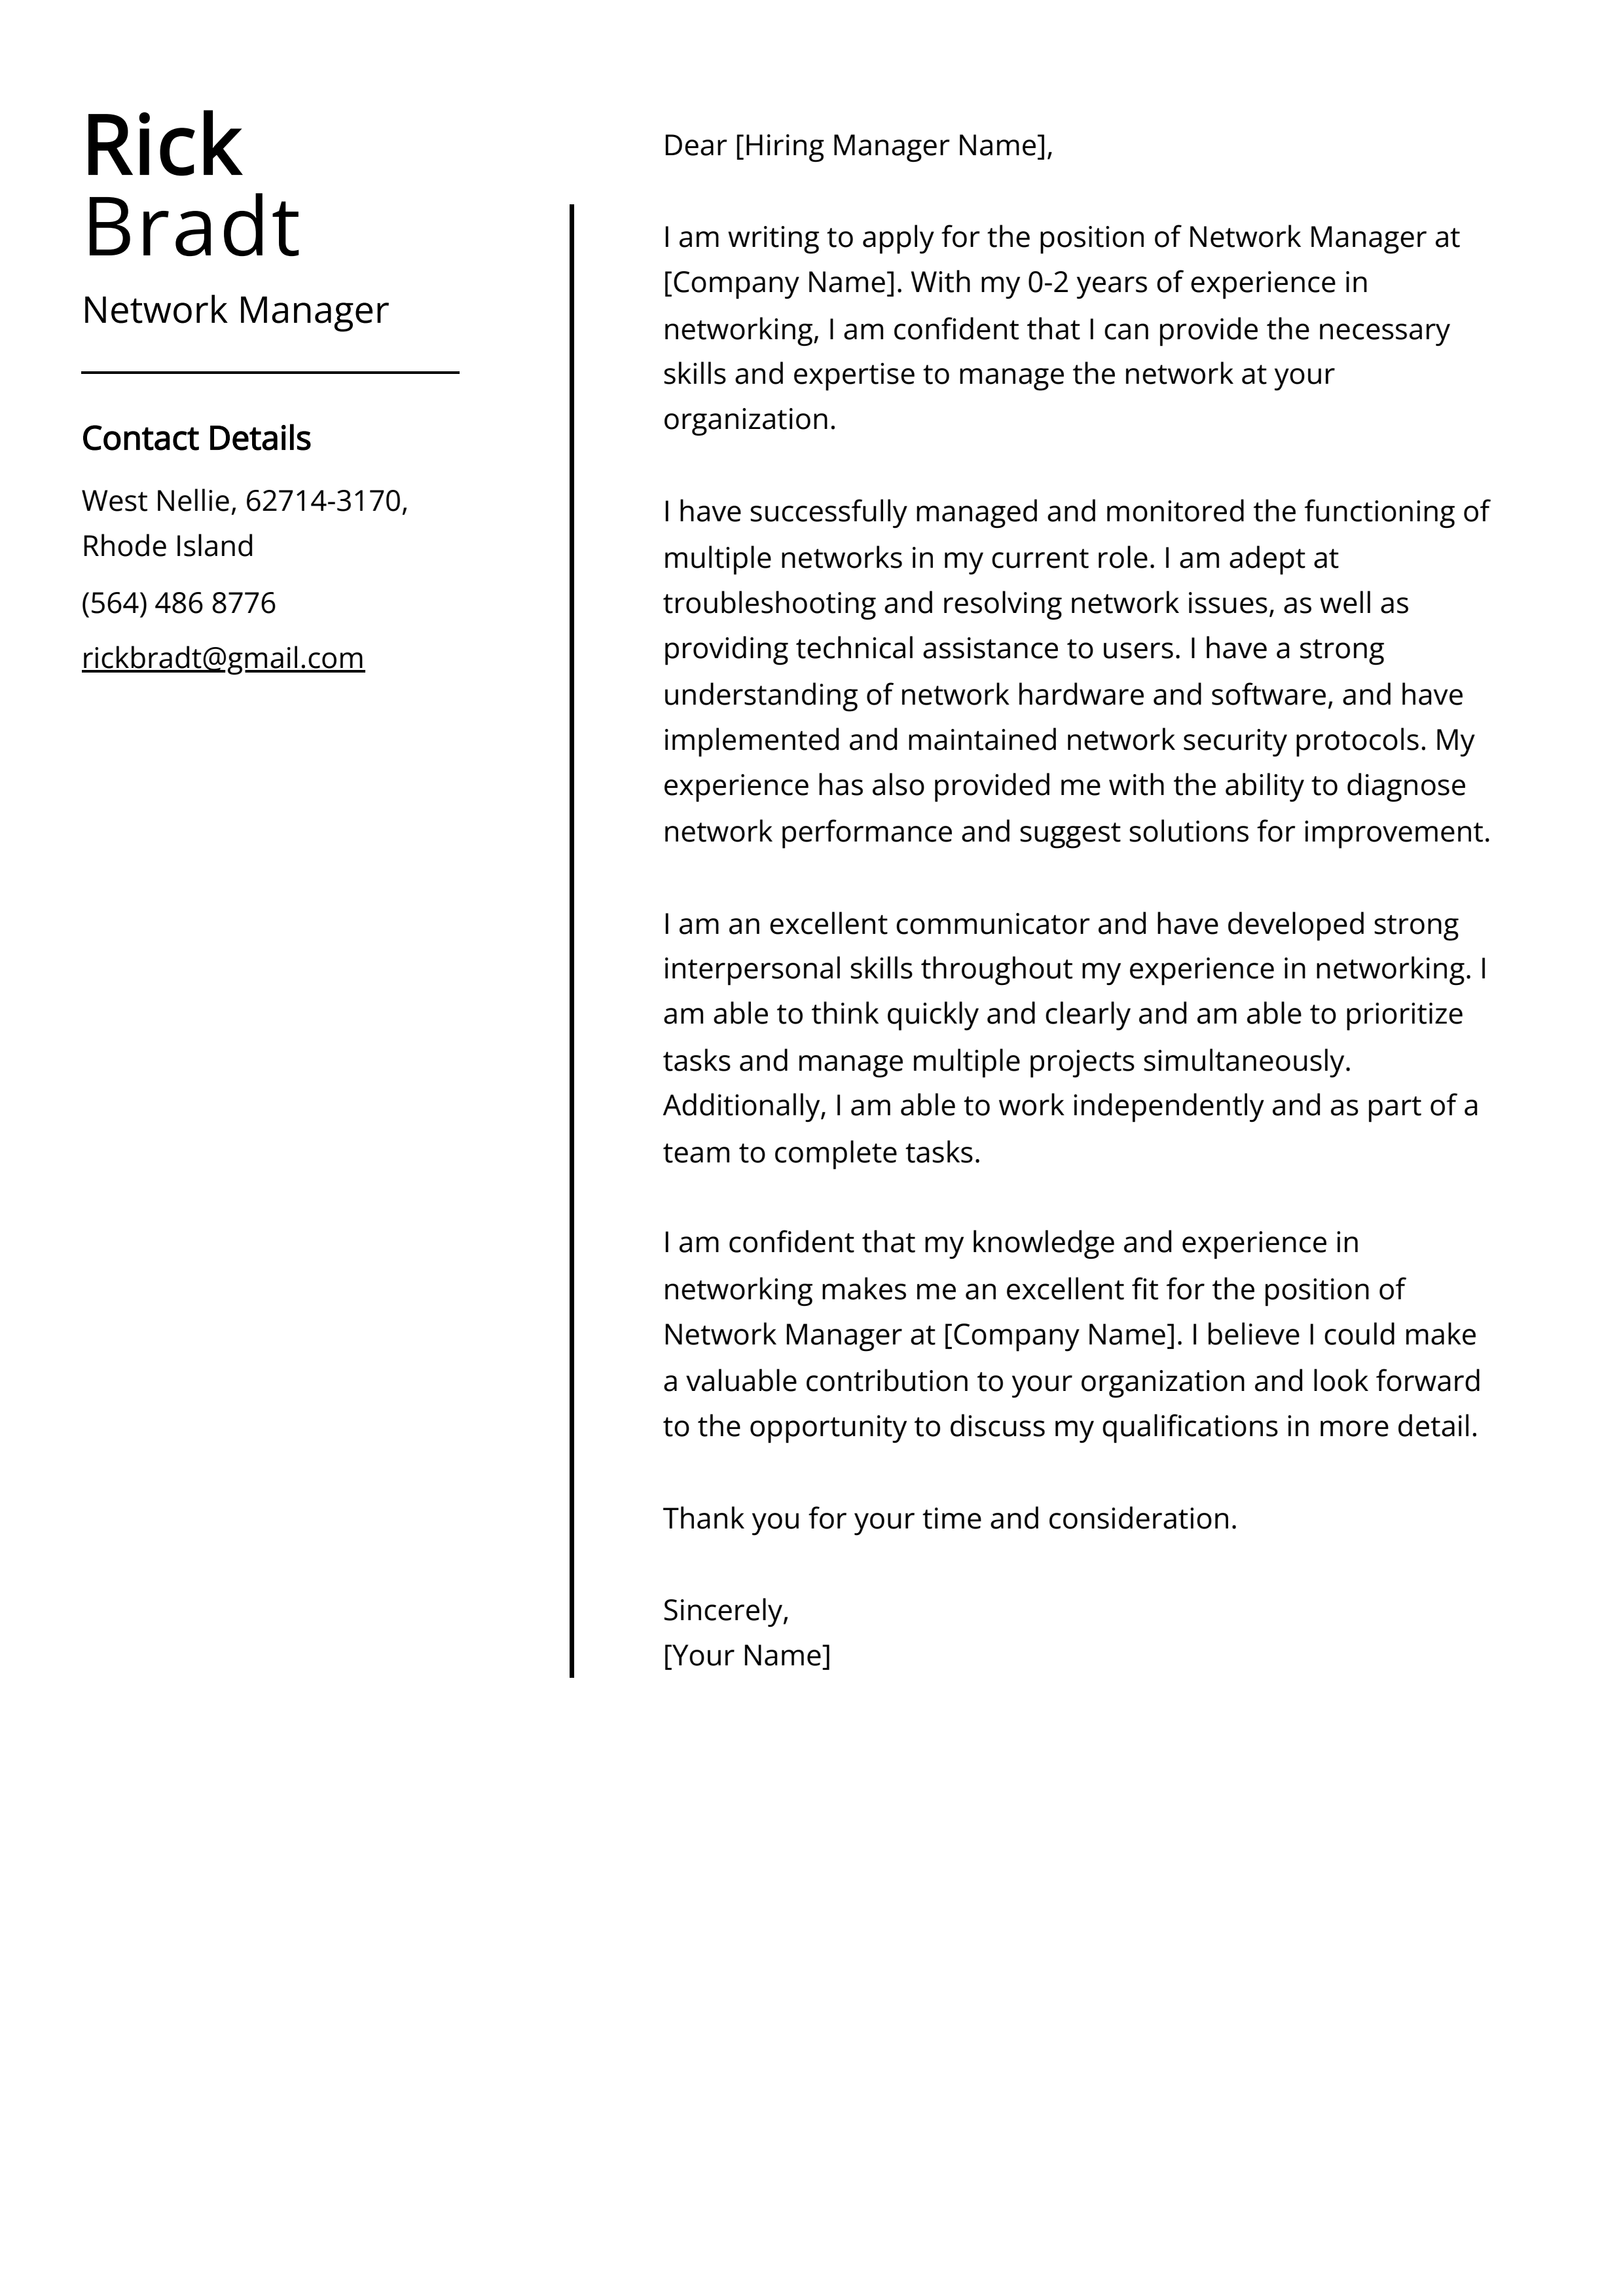 Network Manager Cover Letter Example